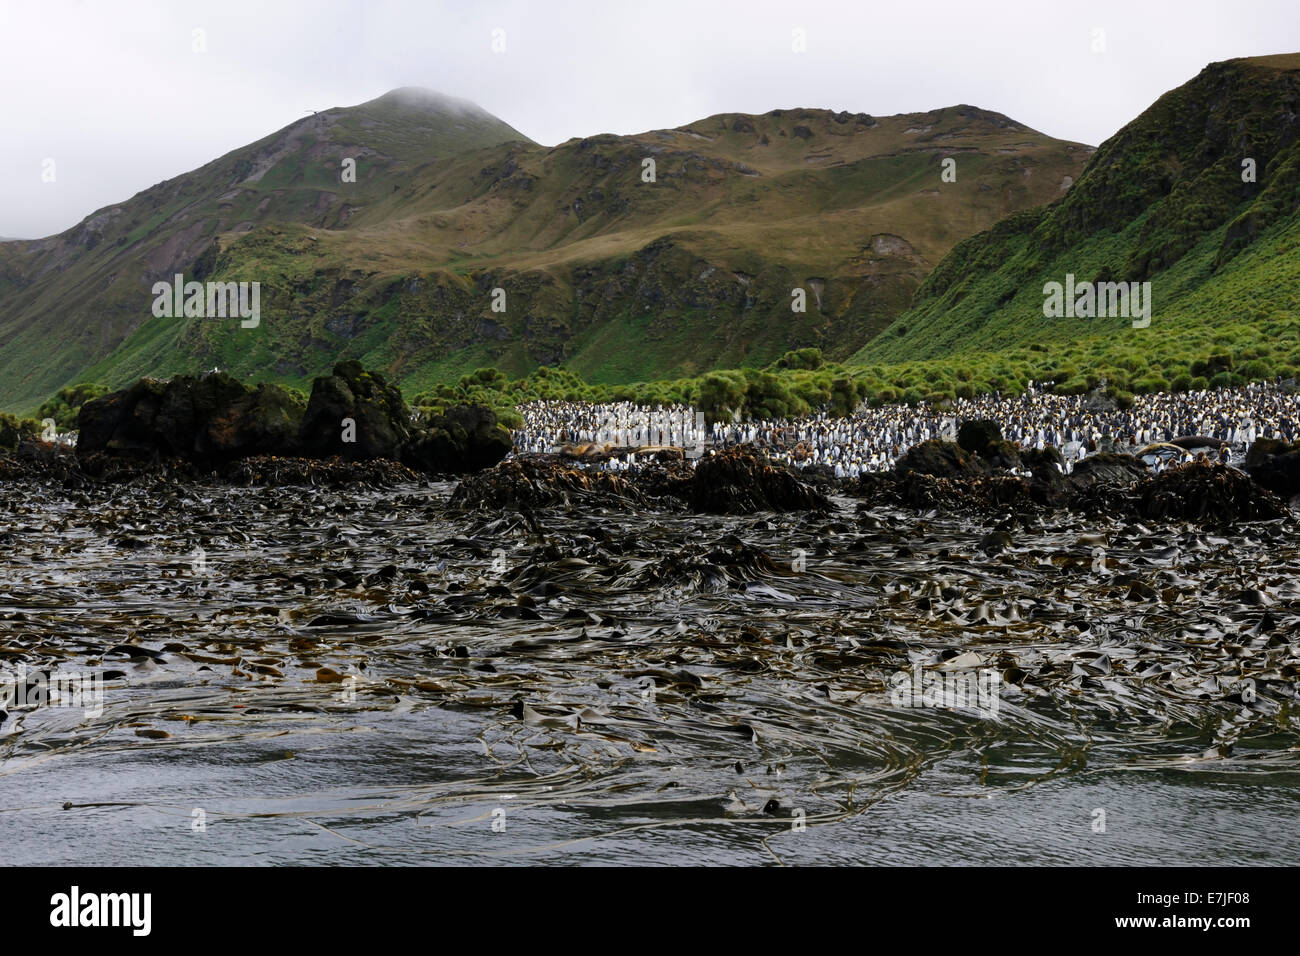 King Penguin (Aptenodytes patagonicus) colony on the beach of Lusitania bay, kelp (Phaeophyceae) in front Stock Photo